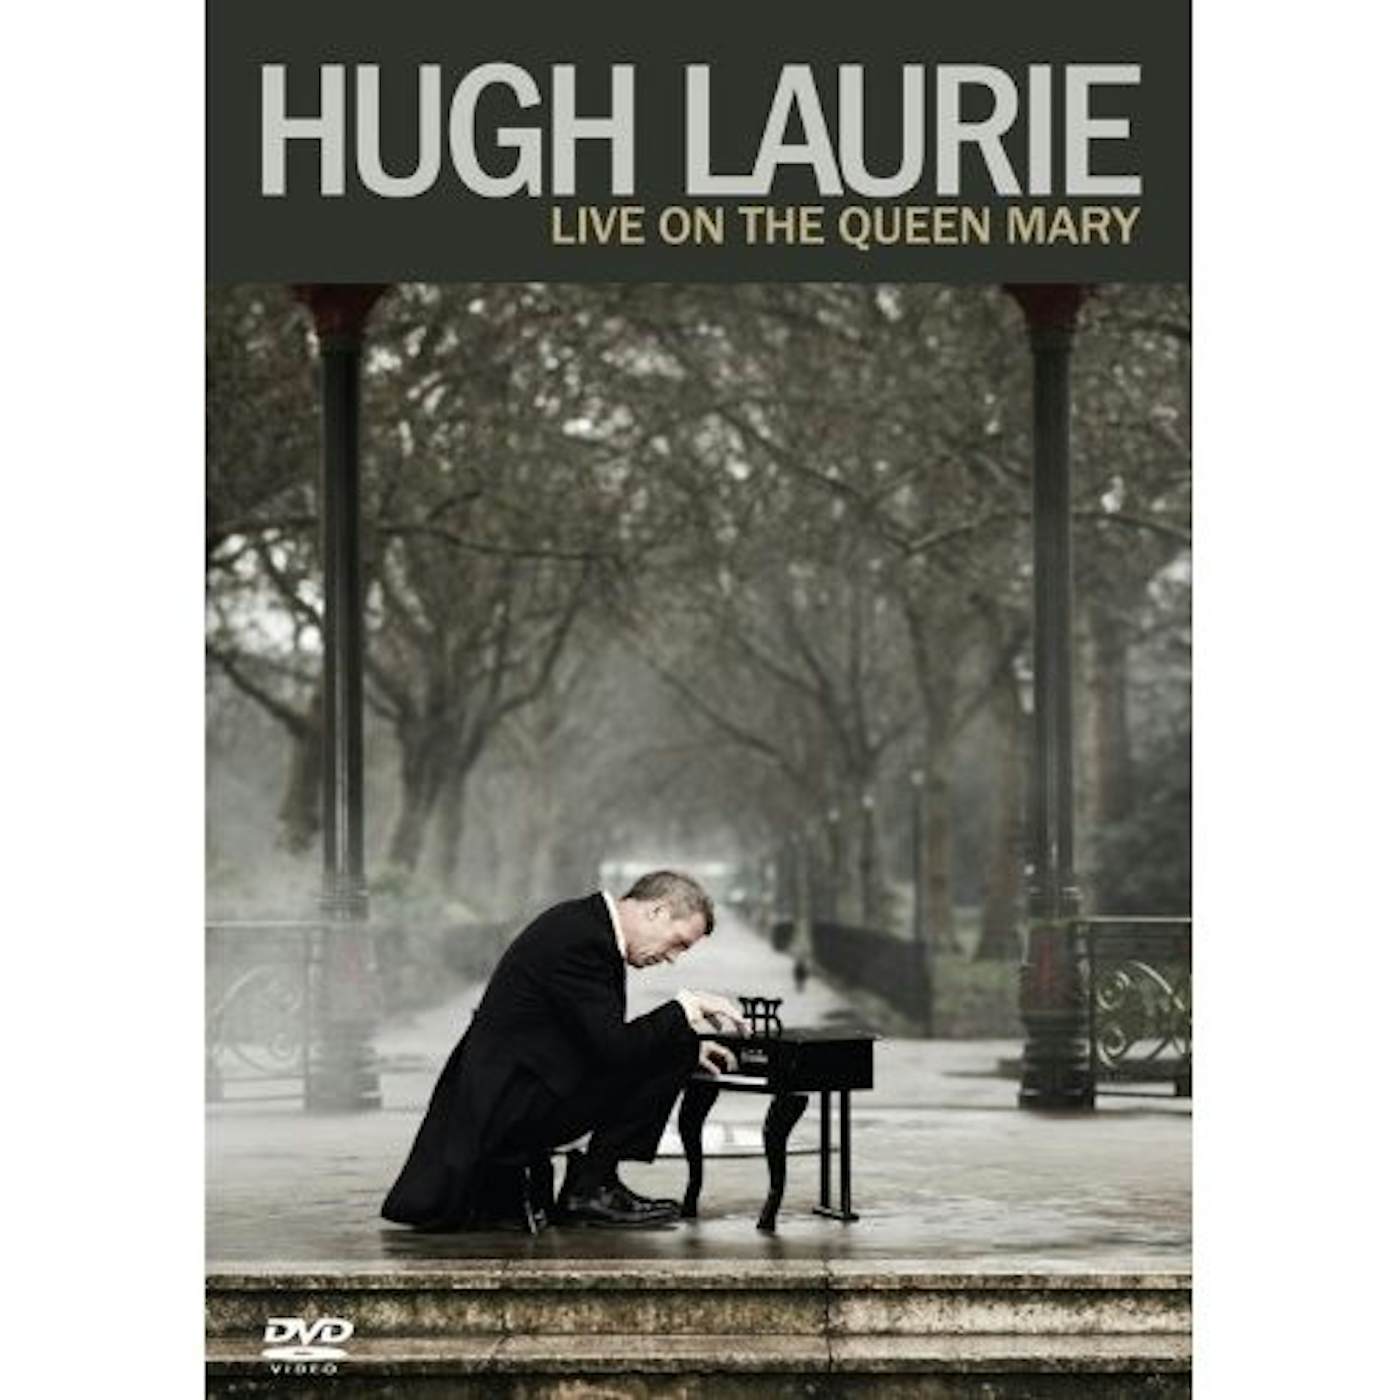 Hugh Laurie LIVE ON THE QUEEN MARY DVD